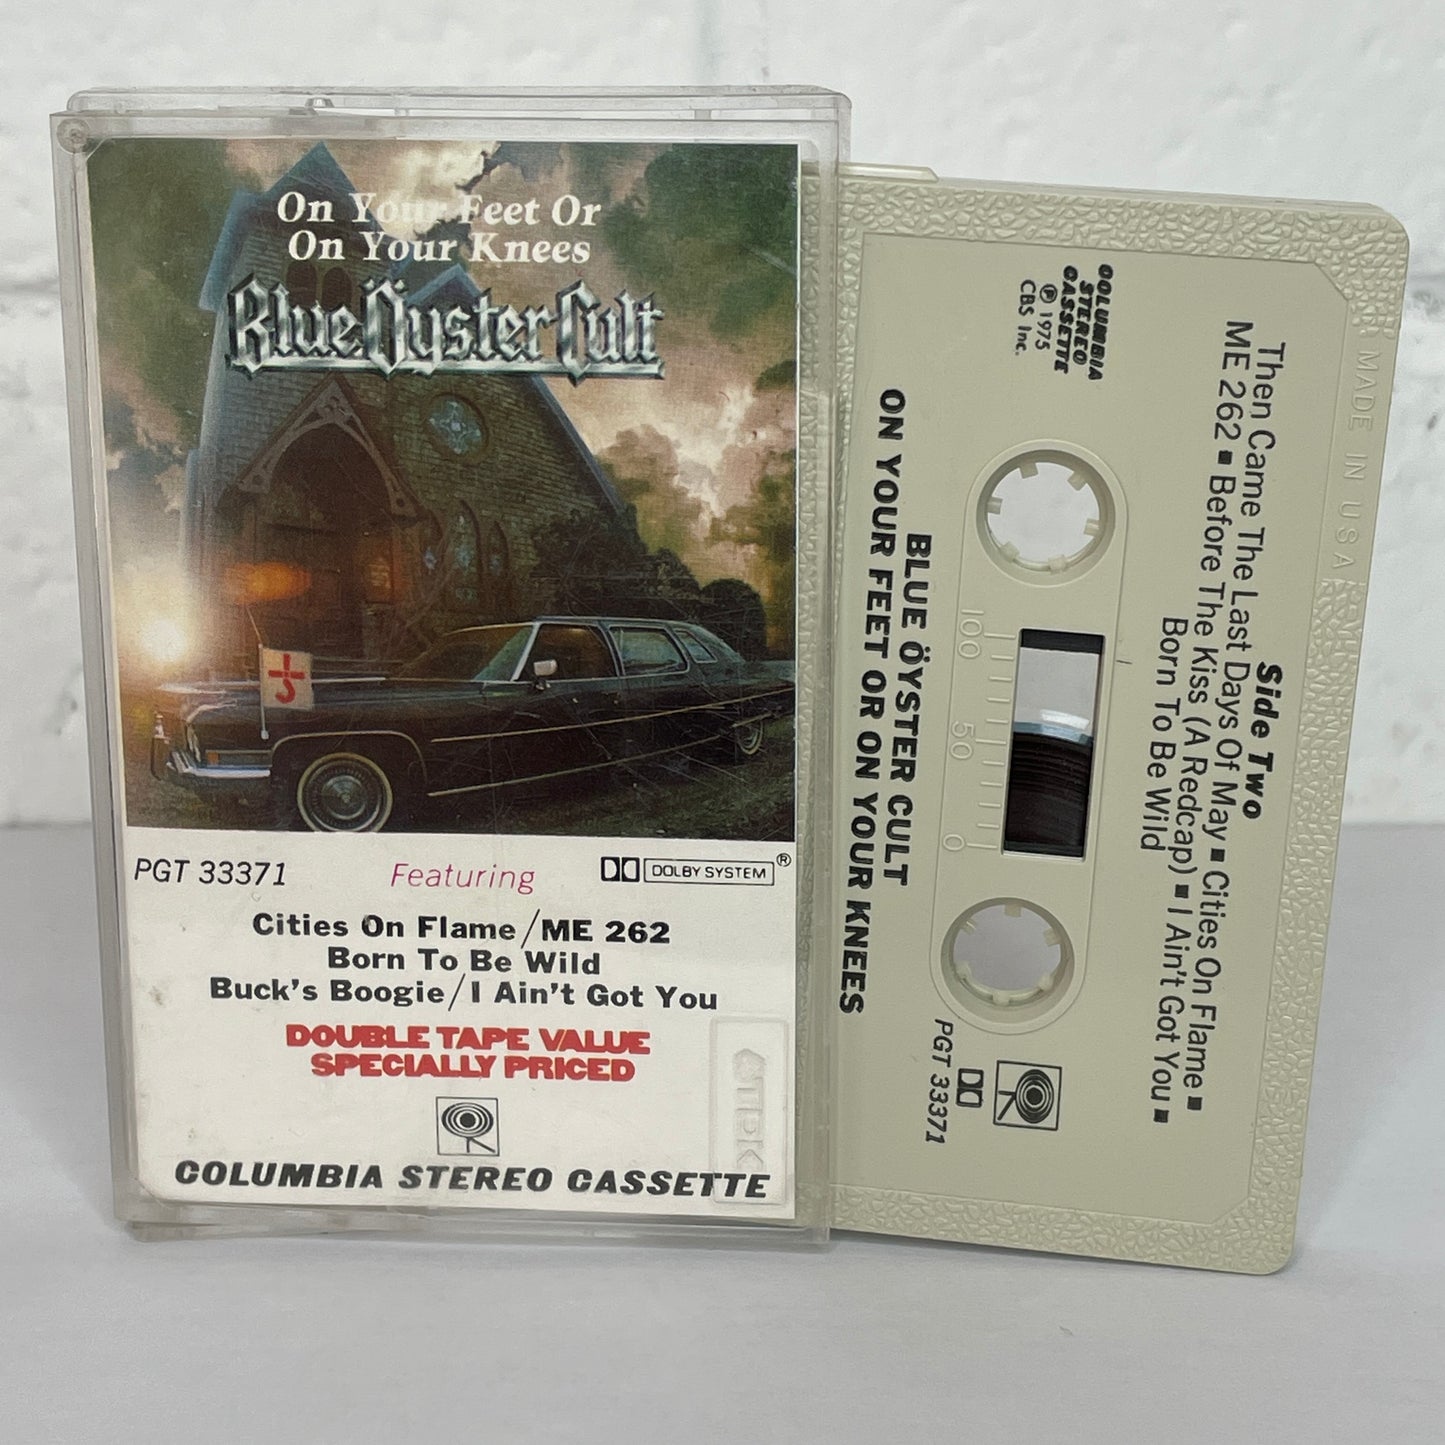 Blue Oyster Cult - On Your Feet or On your Knees original cassette tape